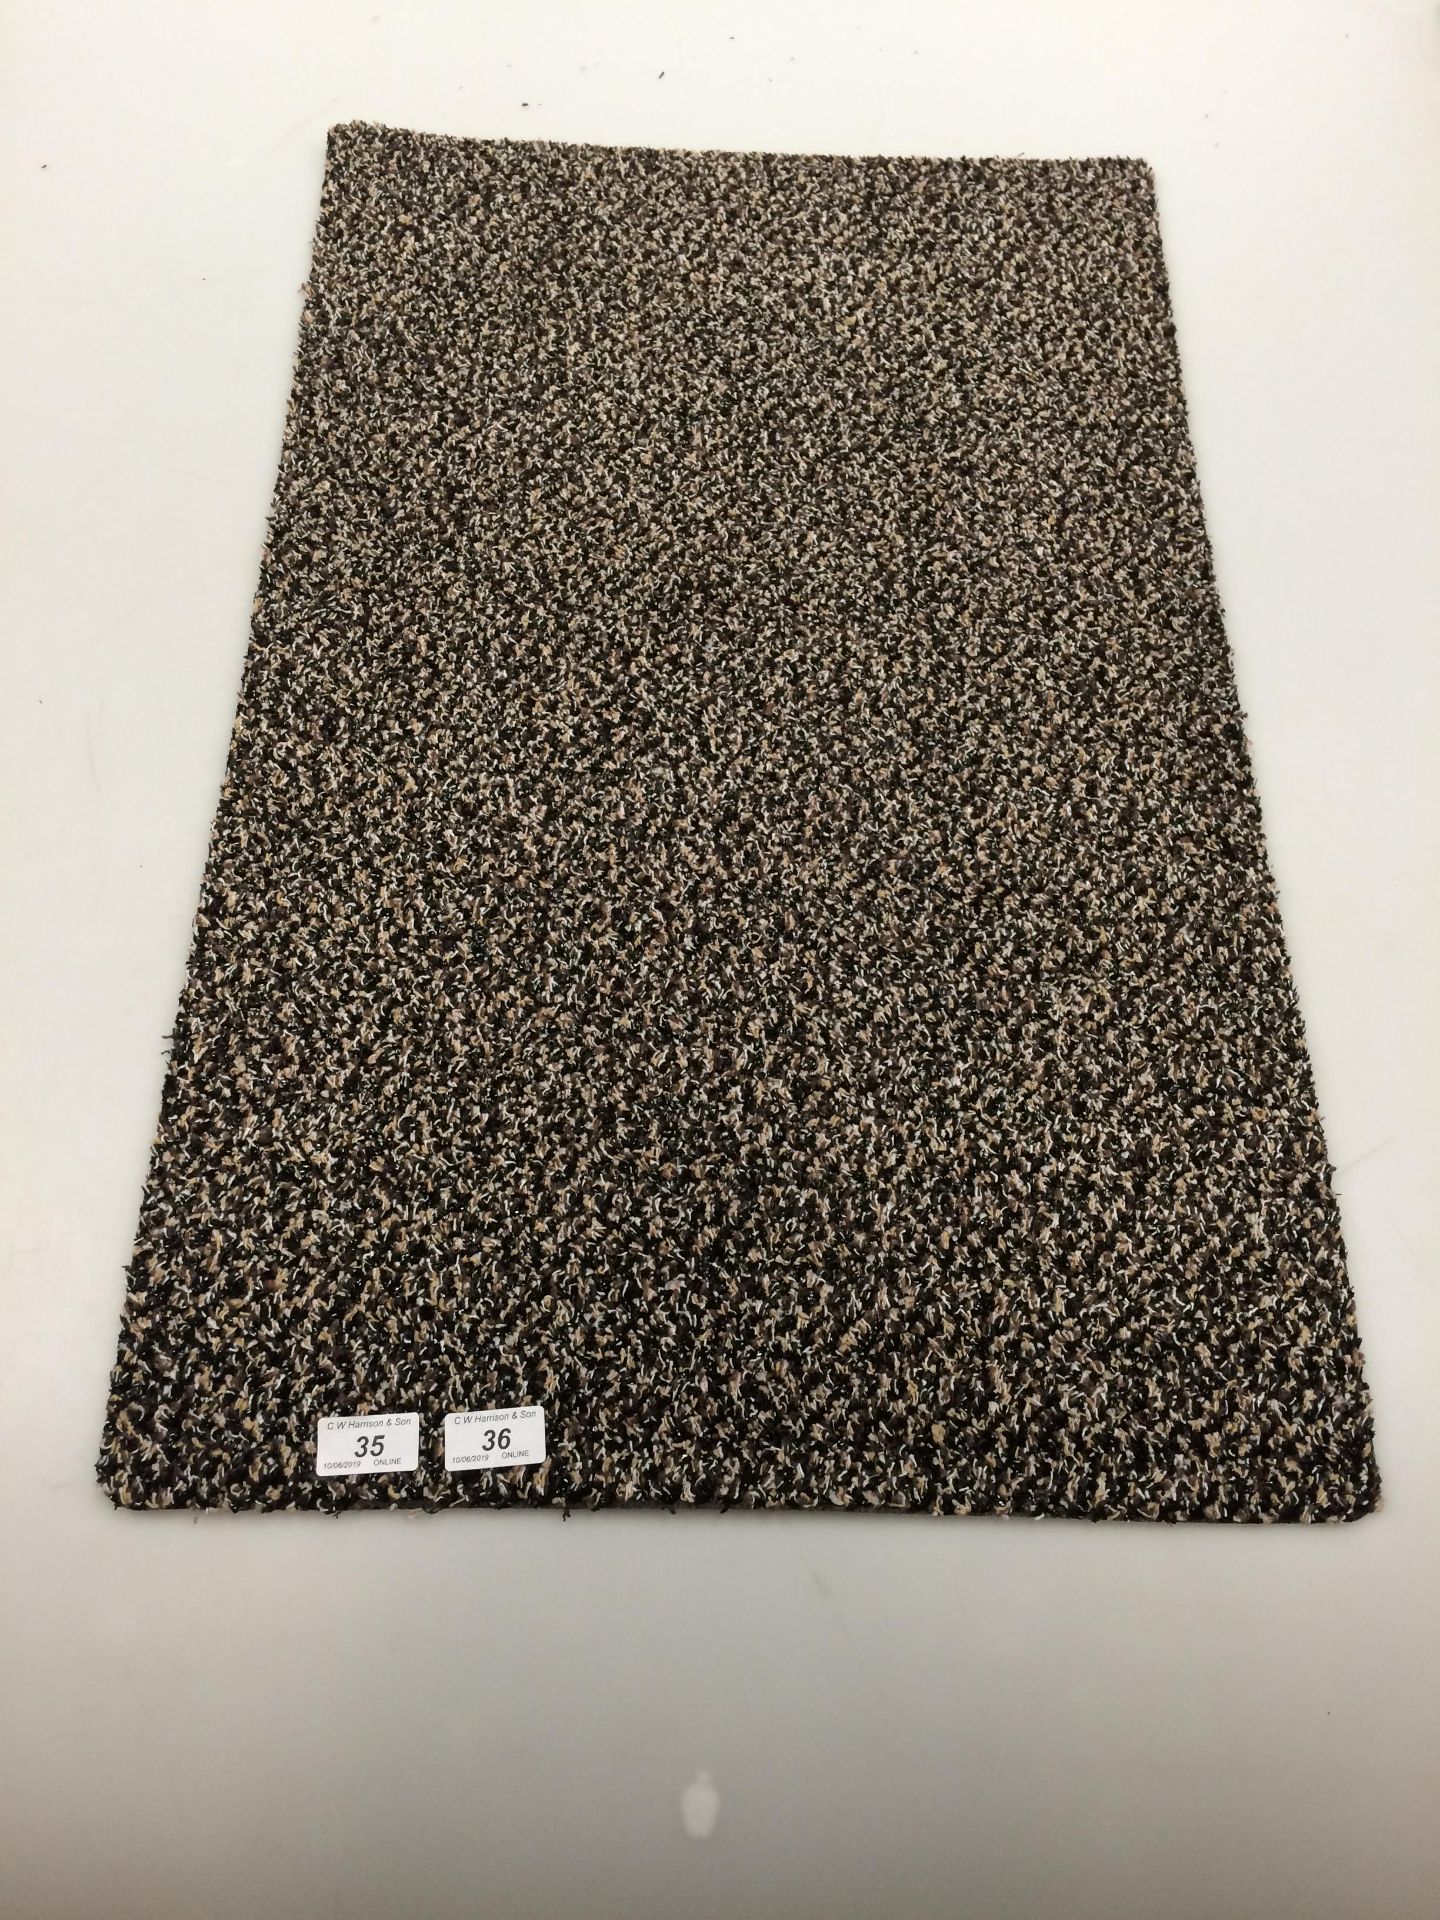 10 x brown patterned door mats with anti-slip rubber each 50 x 80cm